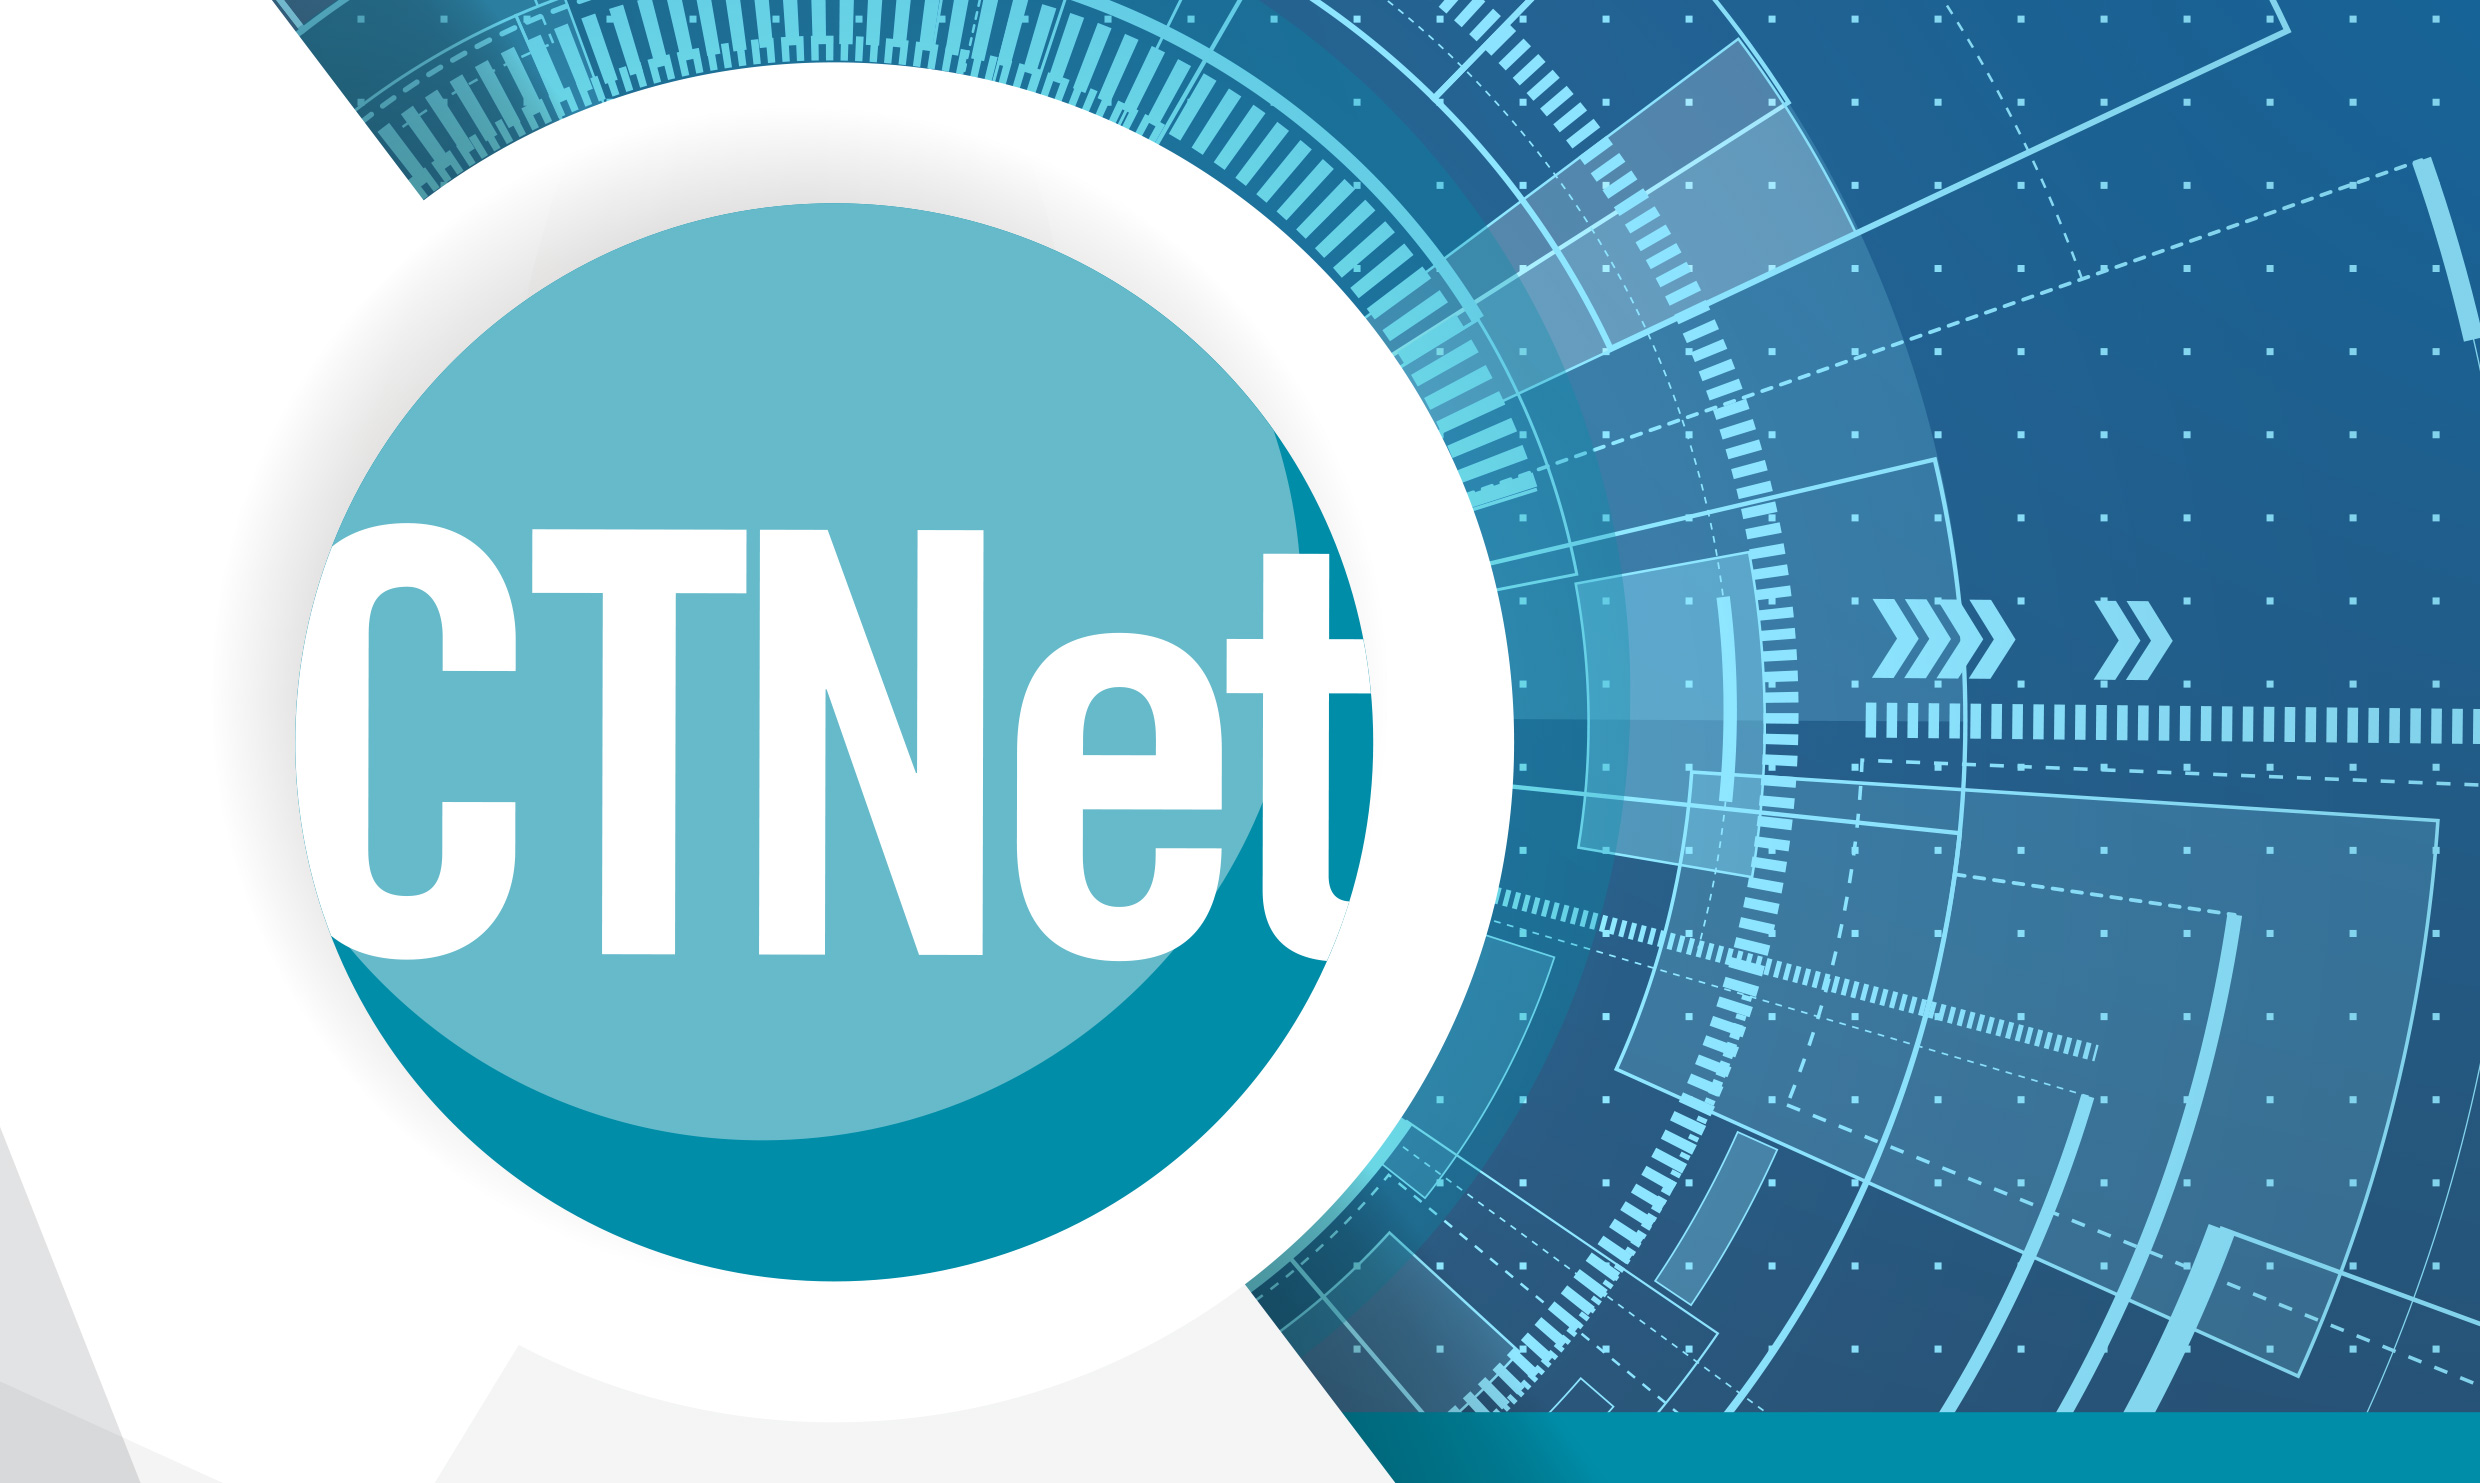 CTNET Lebanon Technology and Low Current System